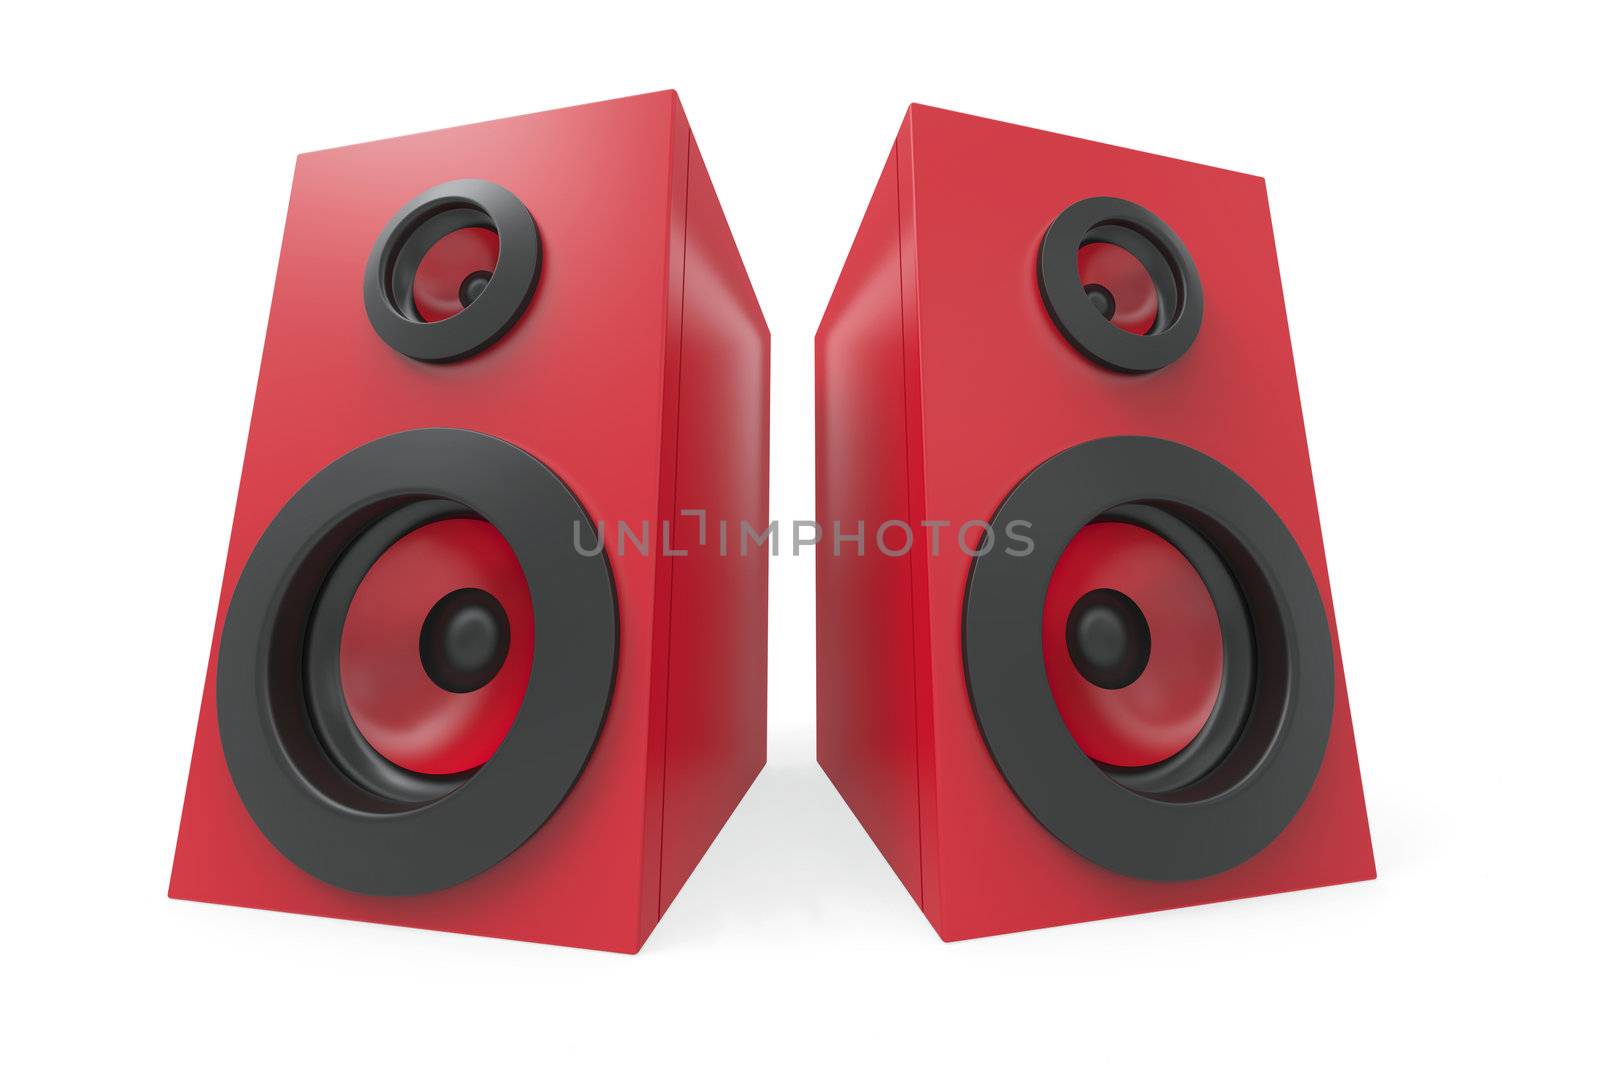 Stereo speakers by magraphics